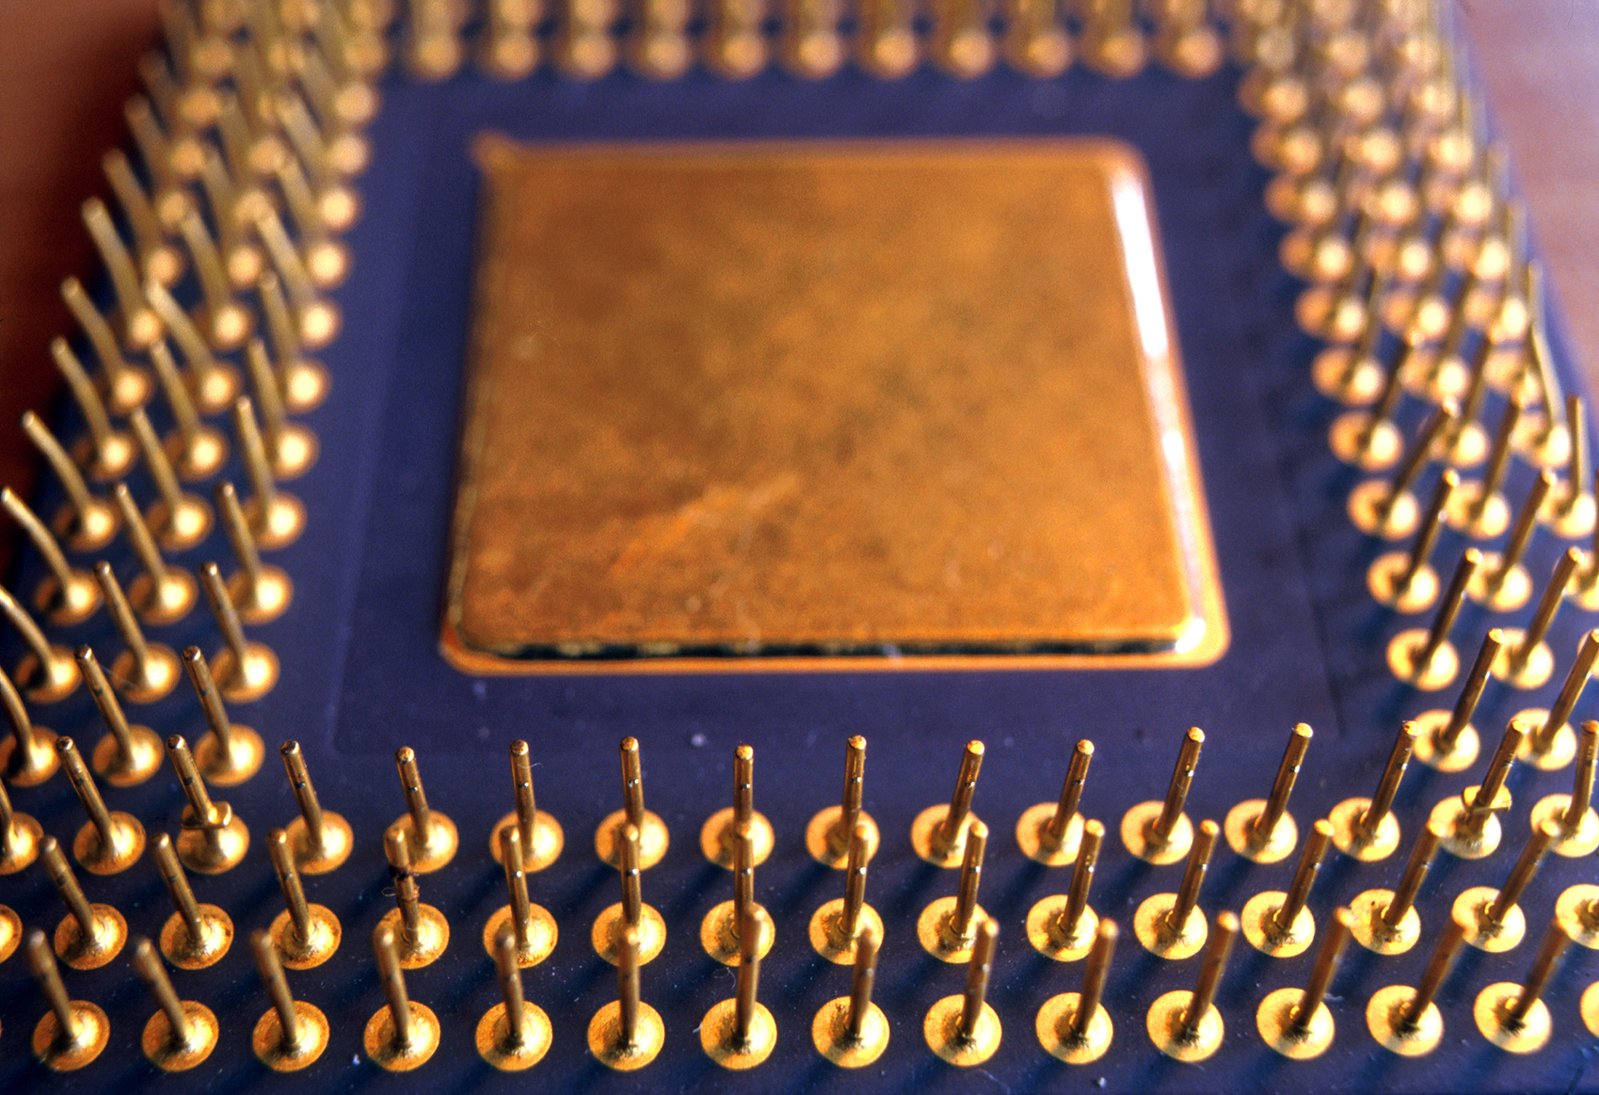 the gold plated electronic components are placed neatly together